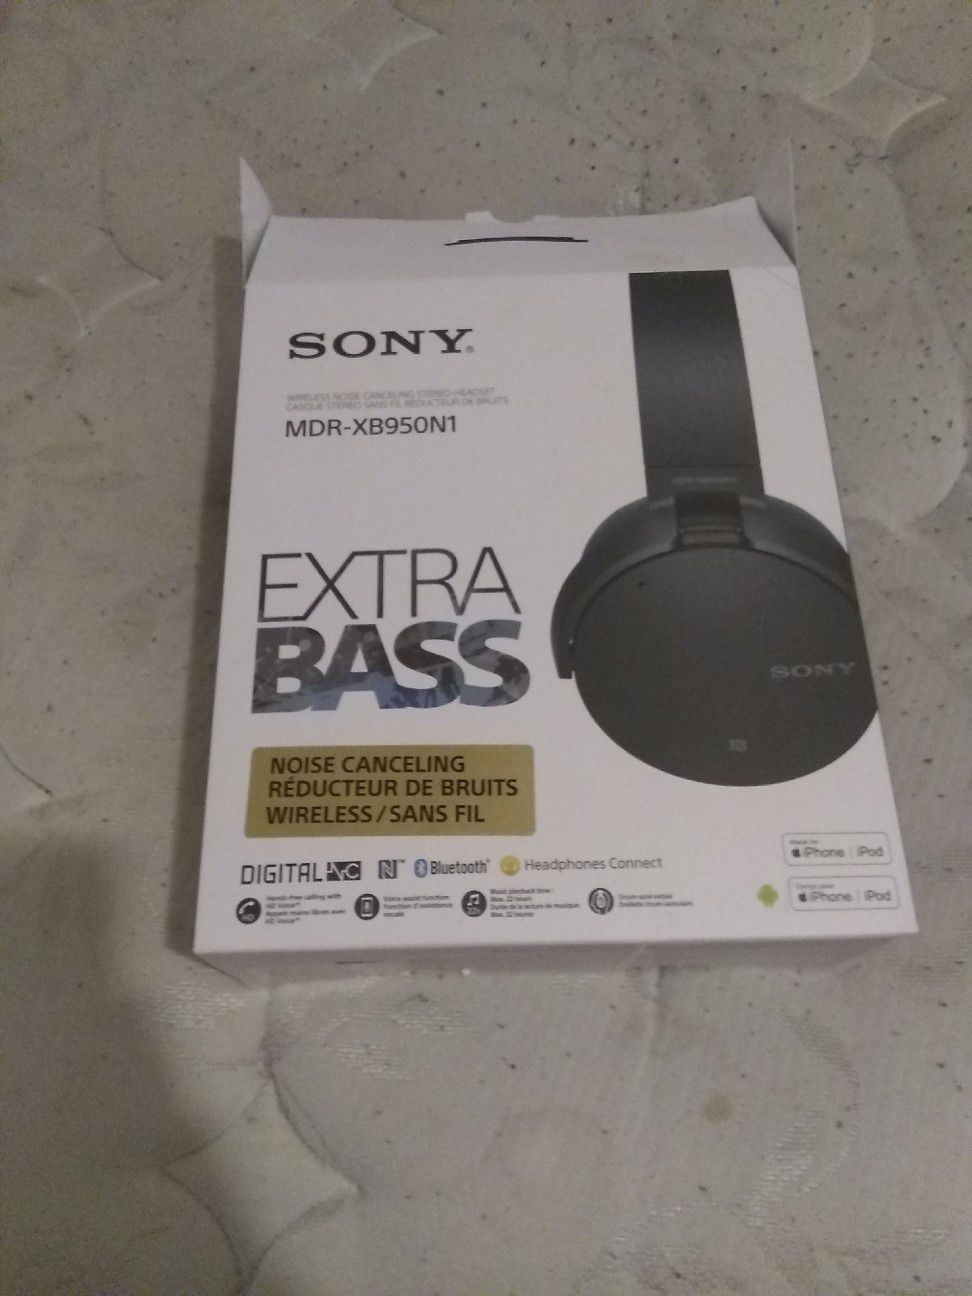 Sony noise canceling extra bass boost headphones